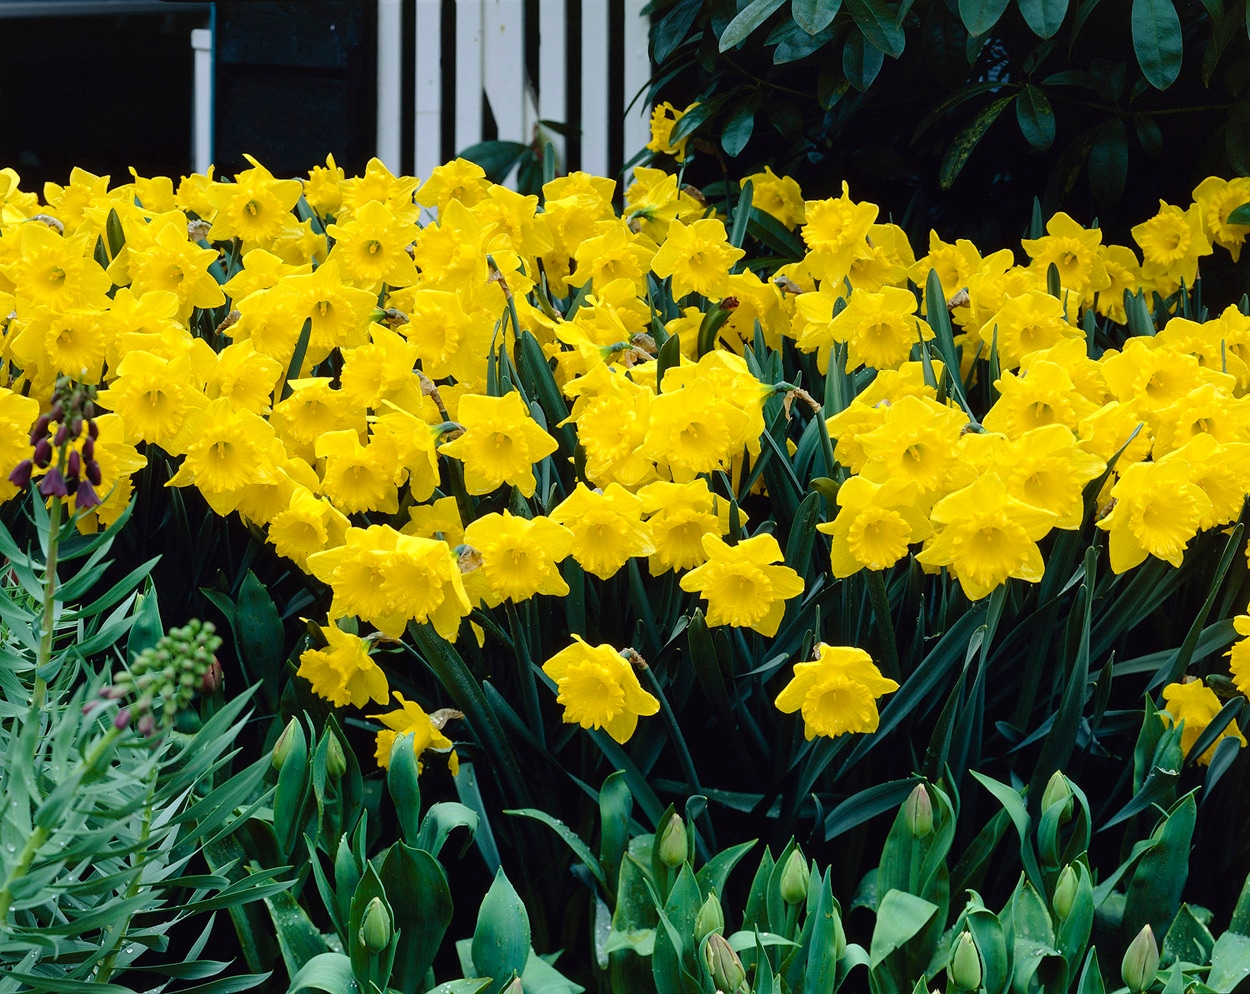 14 Daffodil Facts You Need to Know - Birds and Blooms